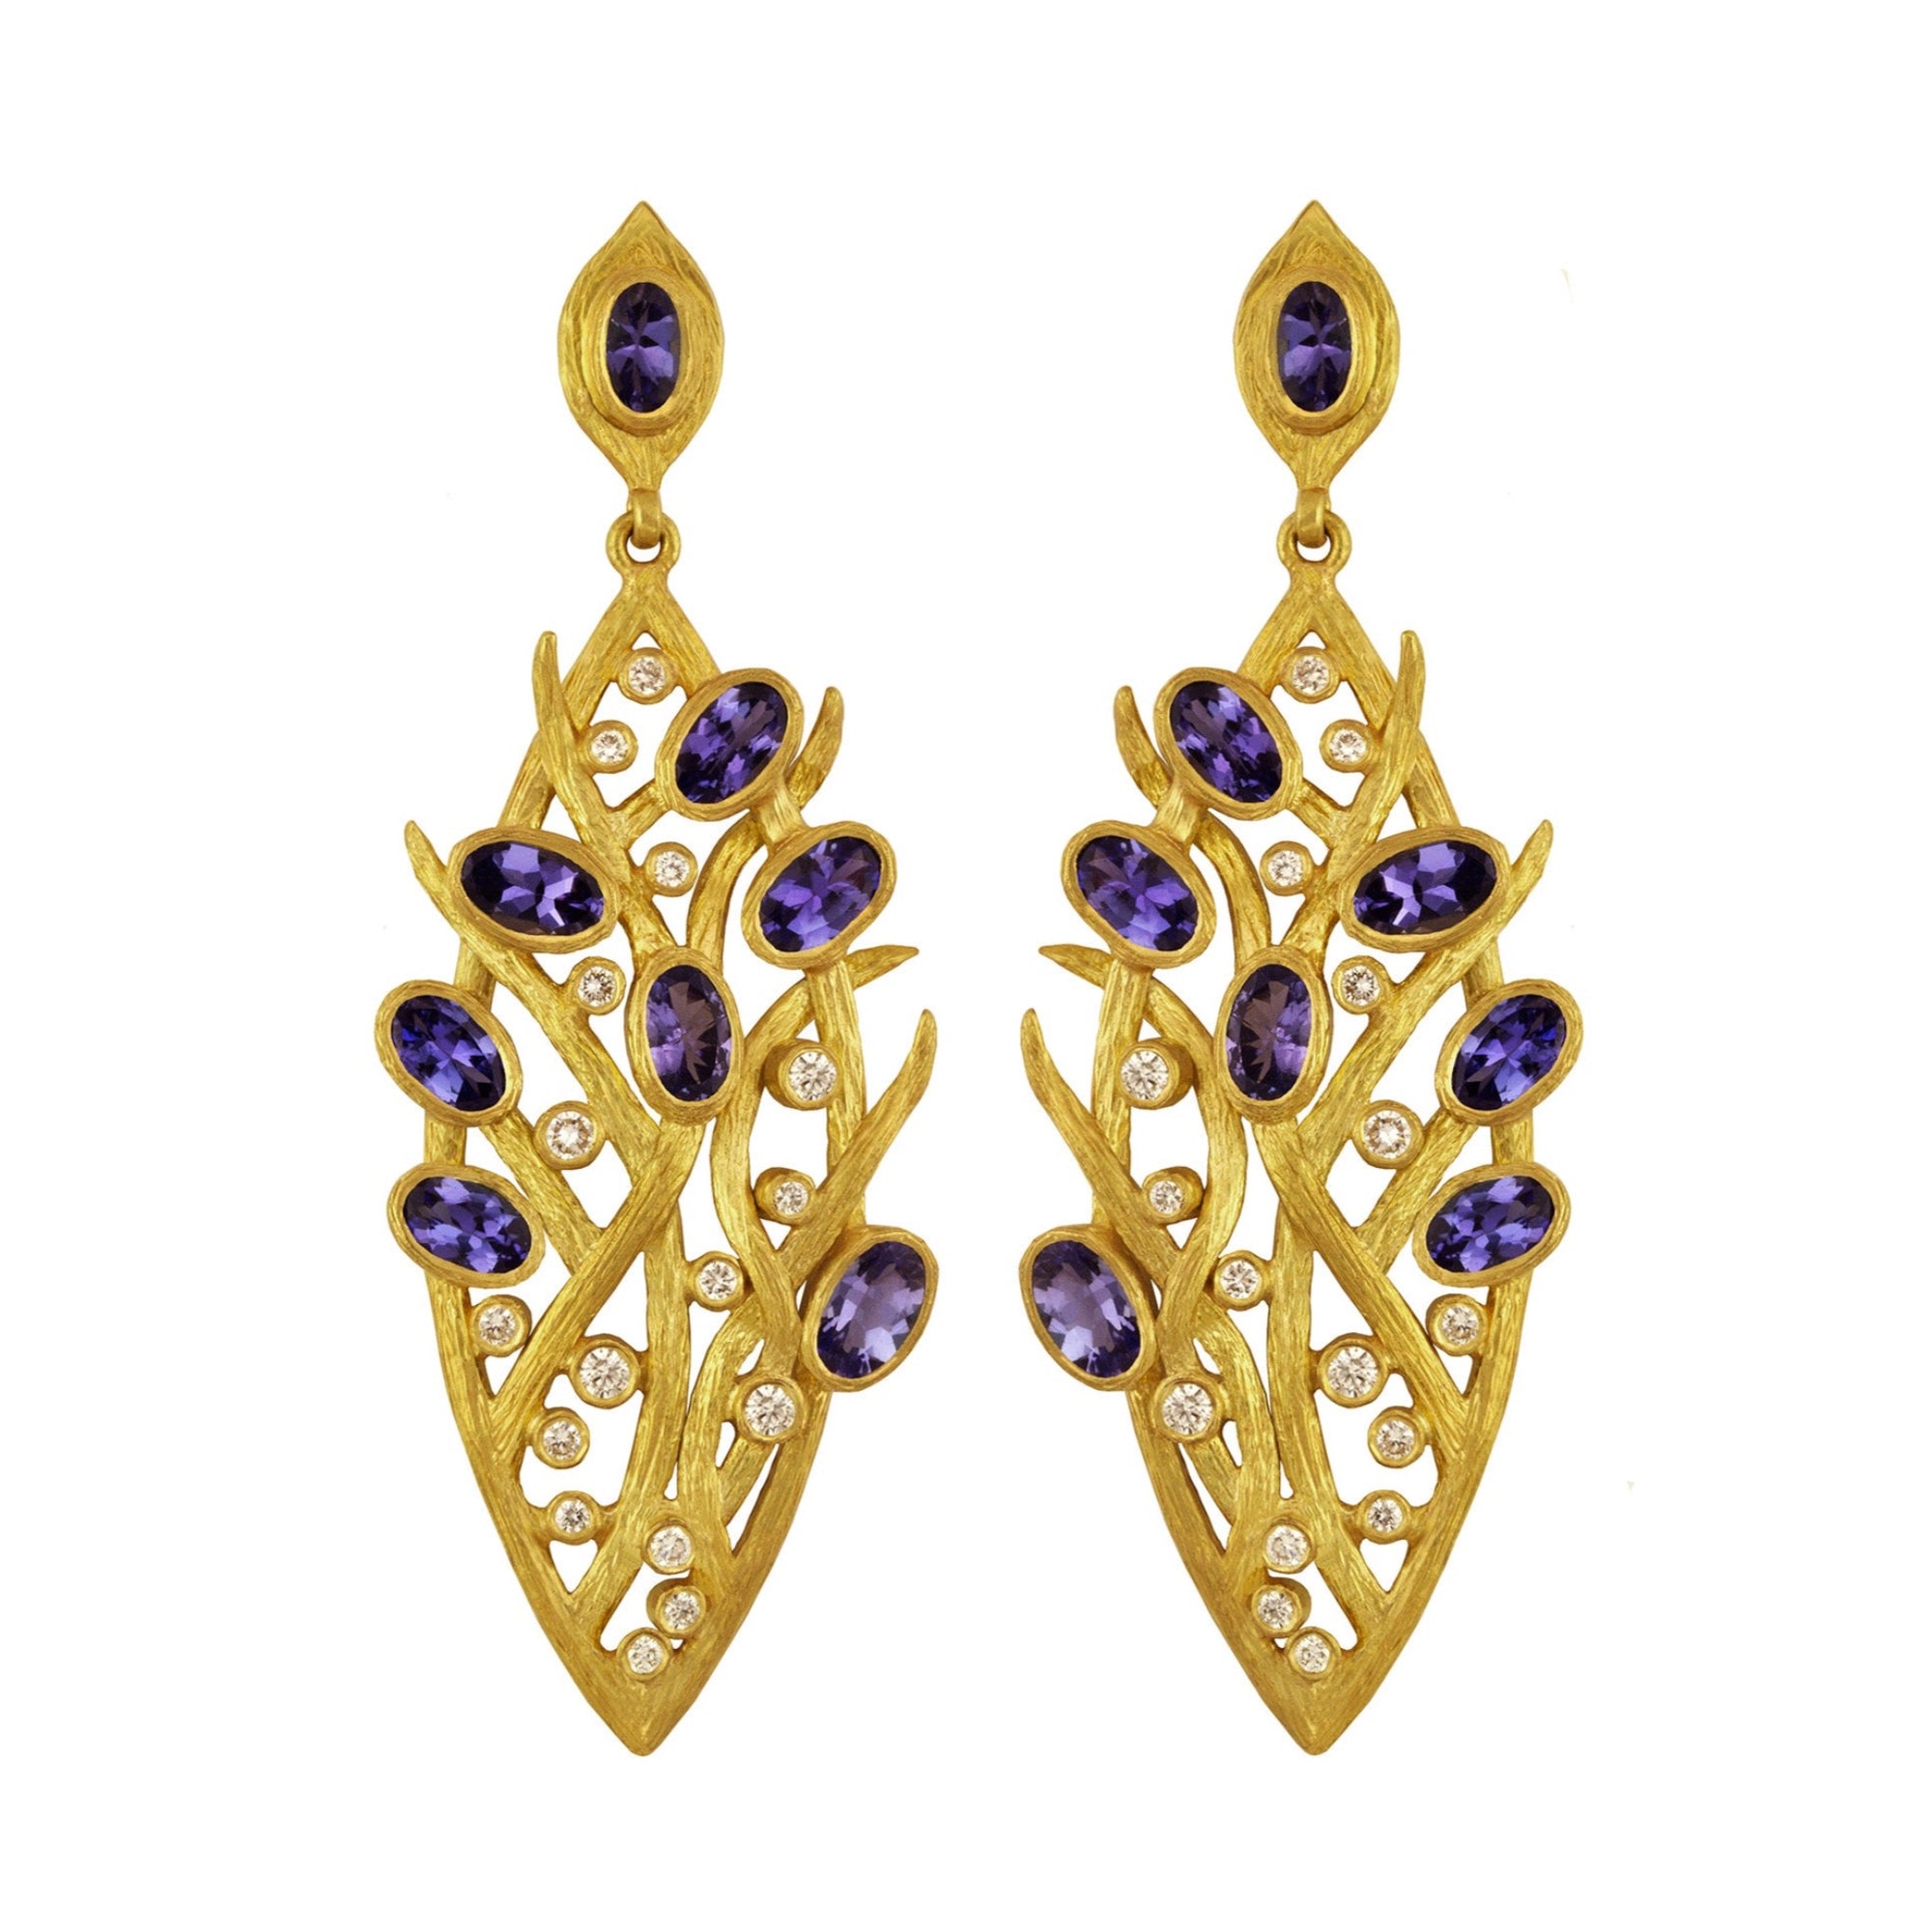 Tanzanite Lemongrass Marquis Earrings by Laurie Kaiser available at Talisman Collection Fine Jewelers in El Dorado Hills, CA and online. Lavished with multiple tanzanite stones and 0.49 cts of white brilliant diamonds set in 18k yellow gold, these earrings are the epitome of luxury. Classic post backs ensure they will sit beautifully on your ear. 